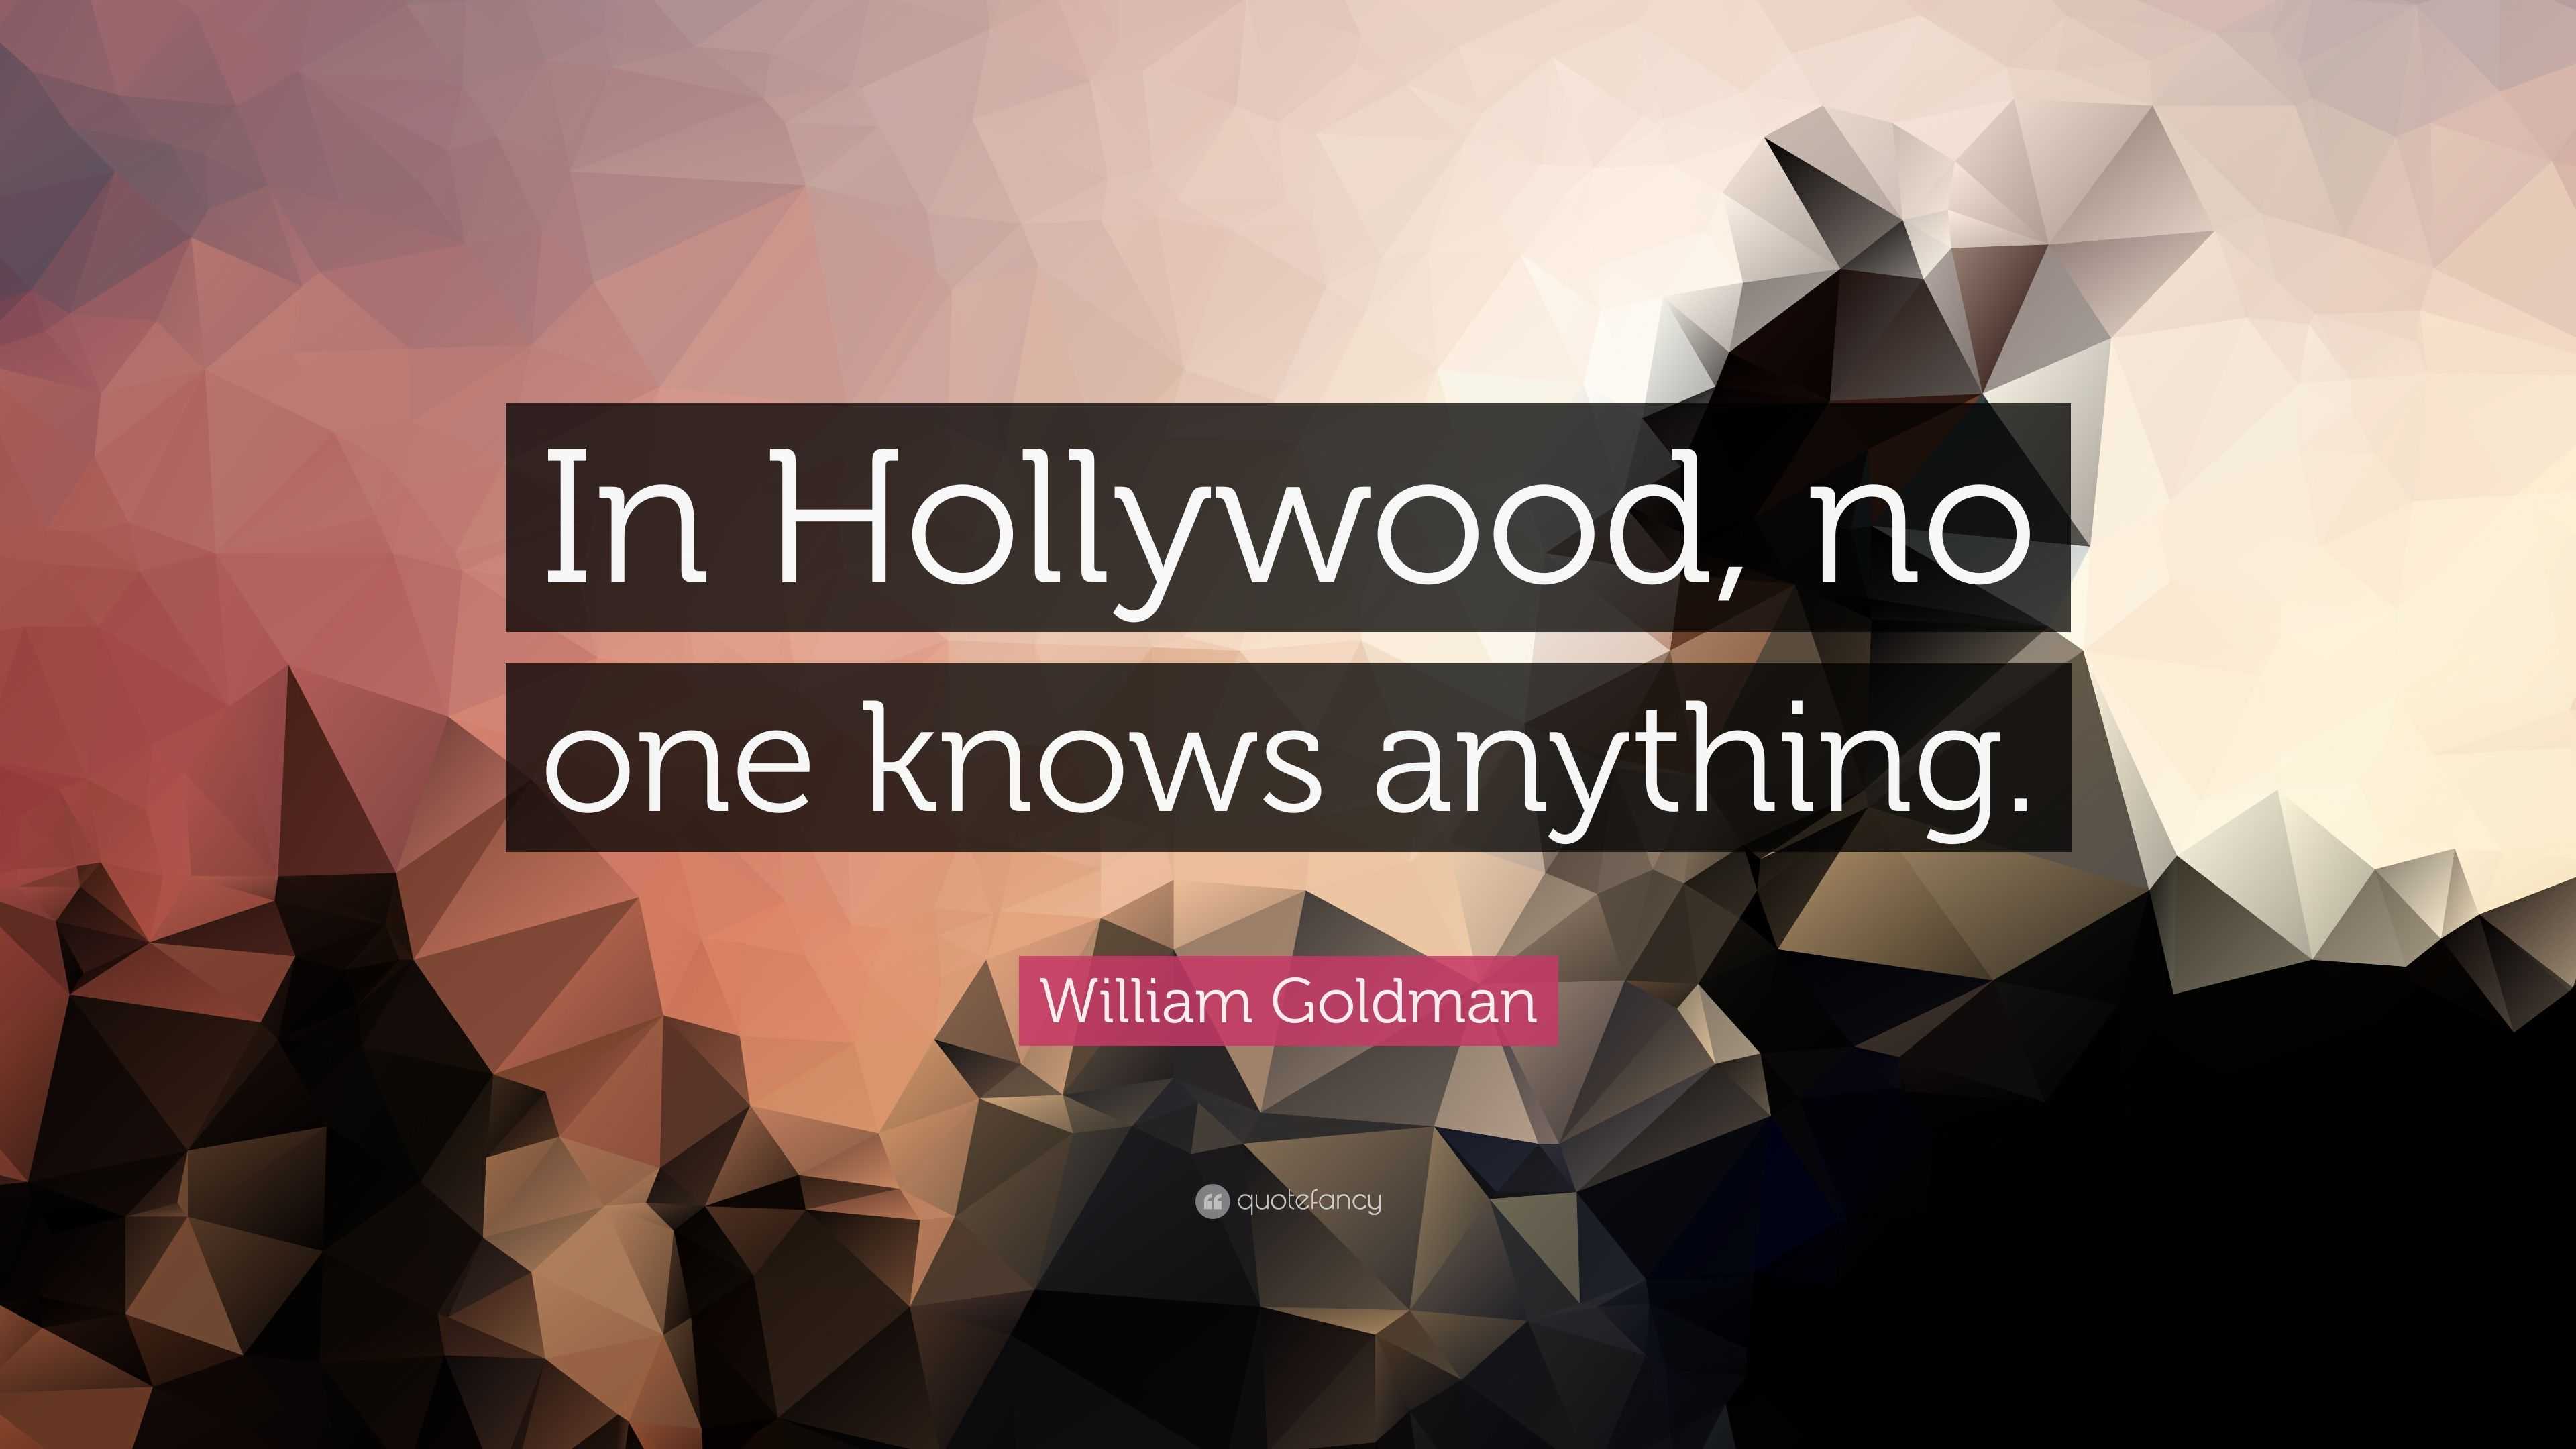 William Goldman Quote “in Hollywood No One Knows Anything ”